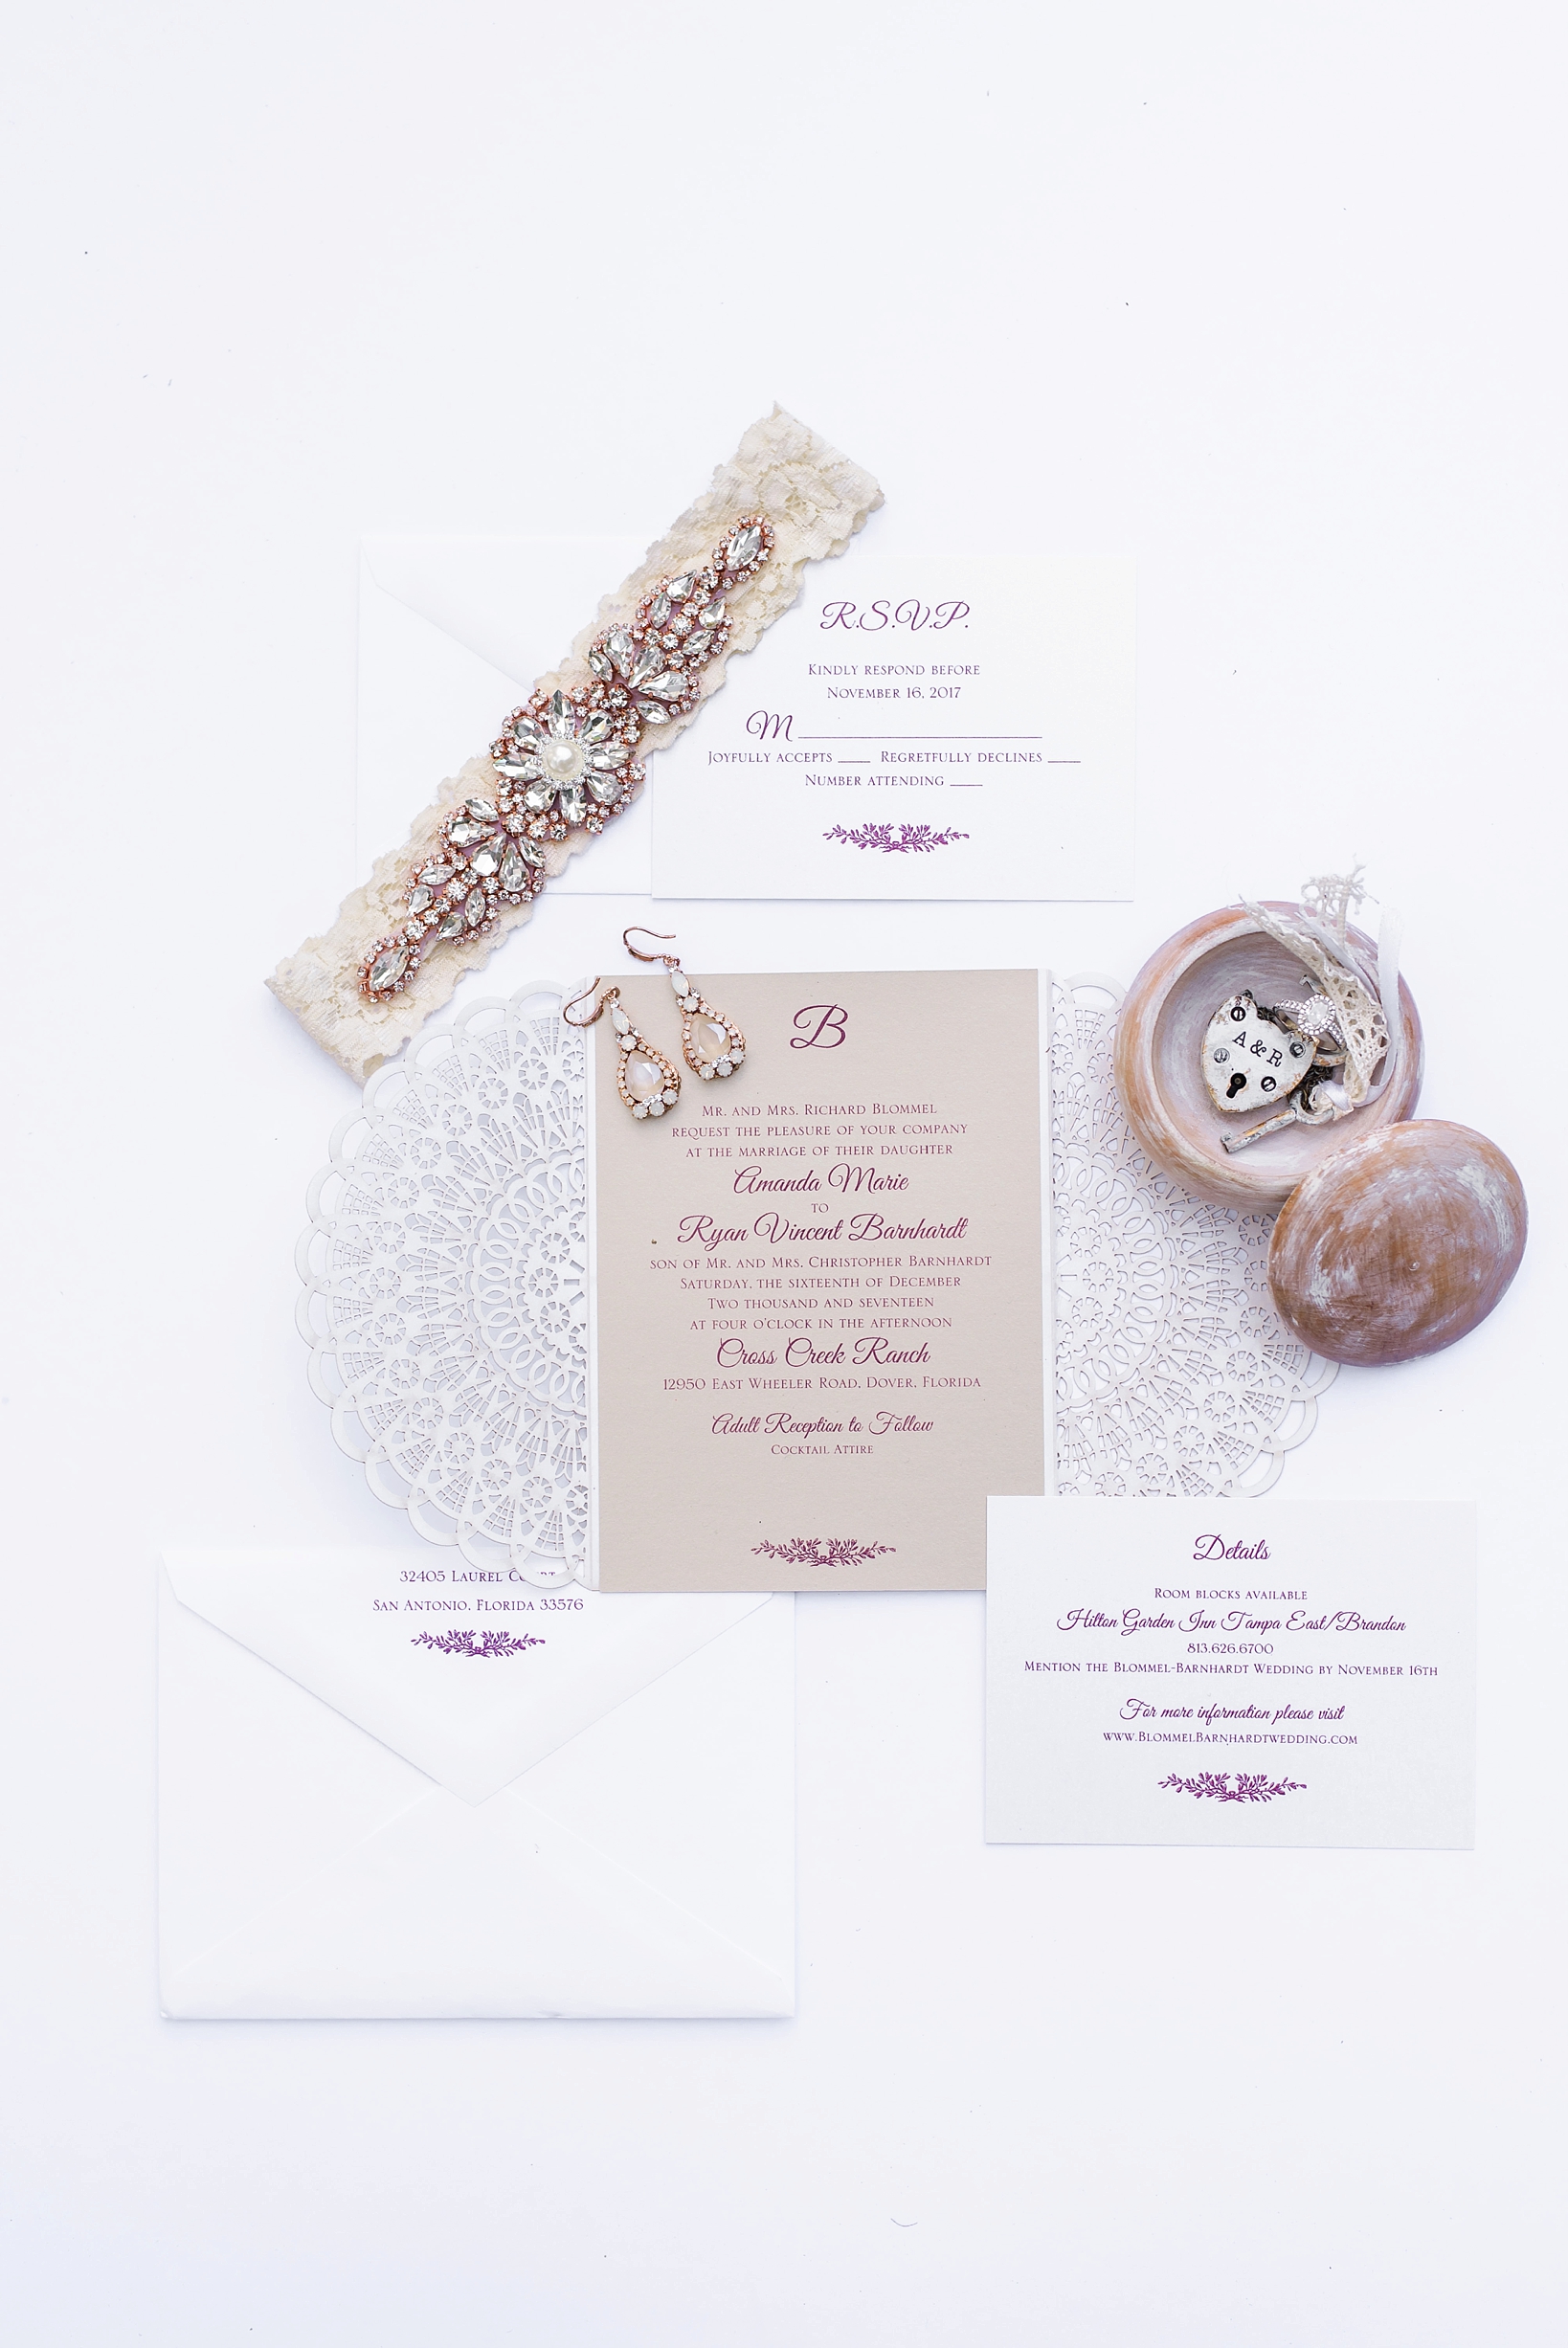 Wedding invitation suite with brides garter and ring box